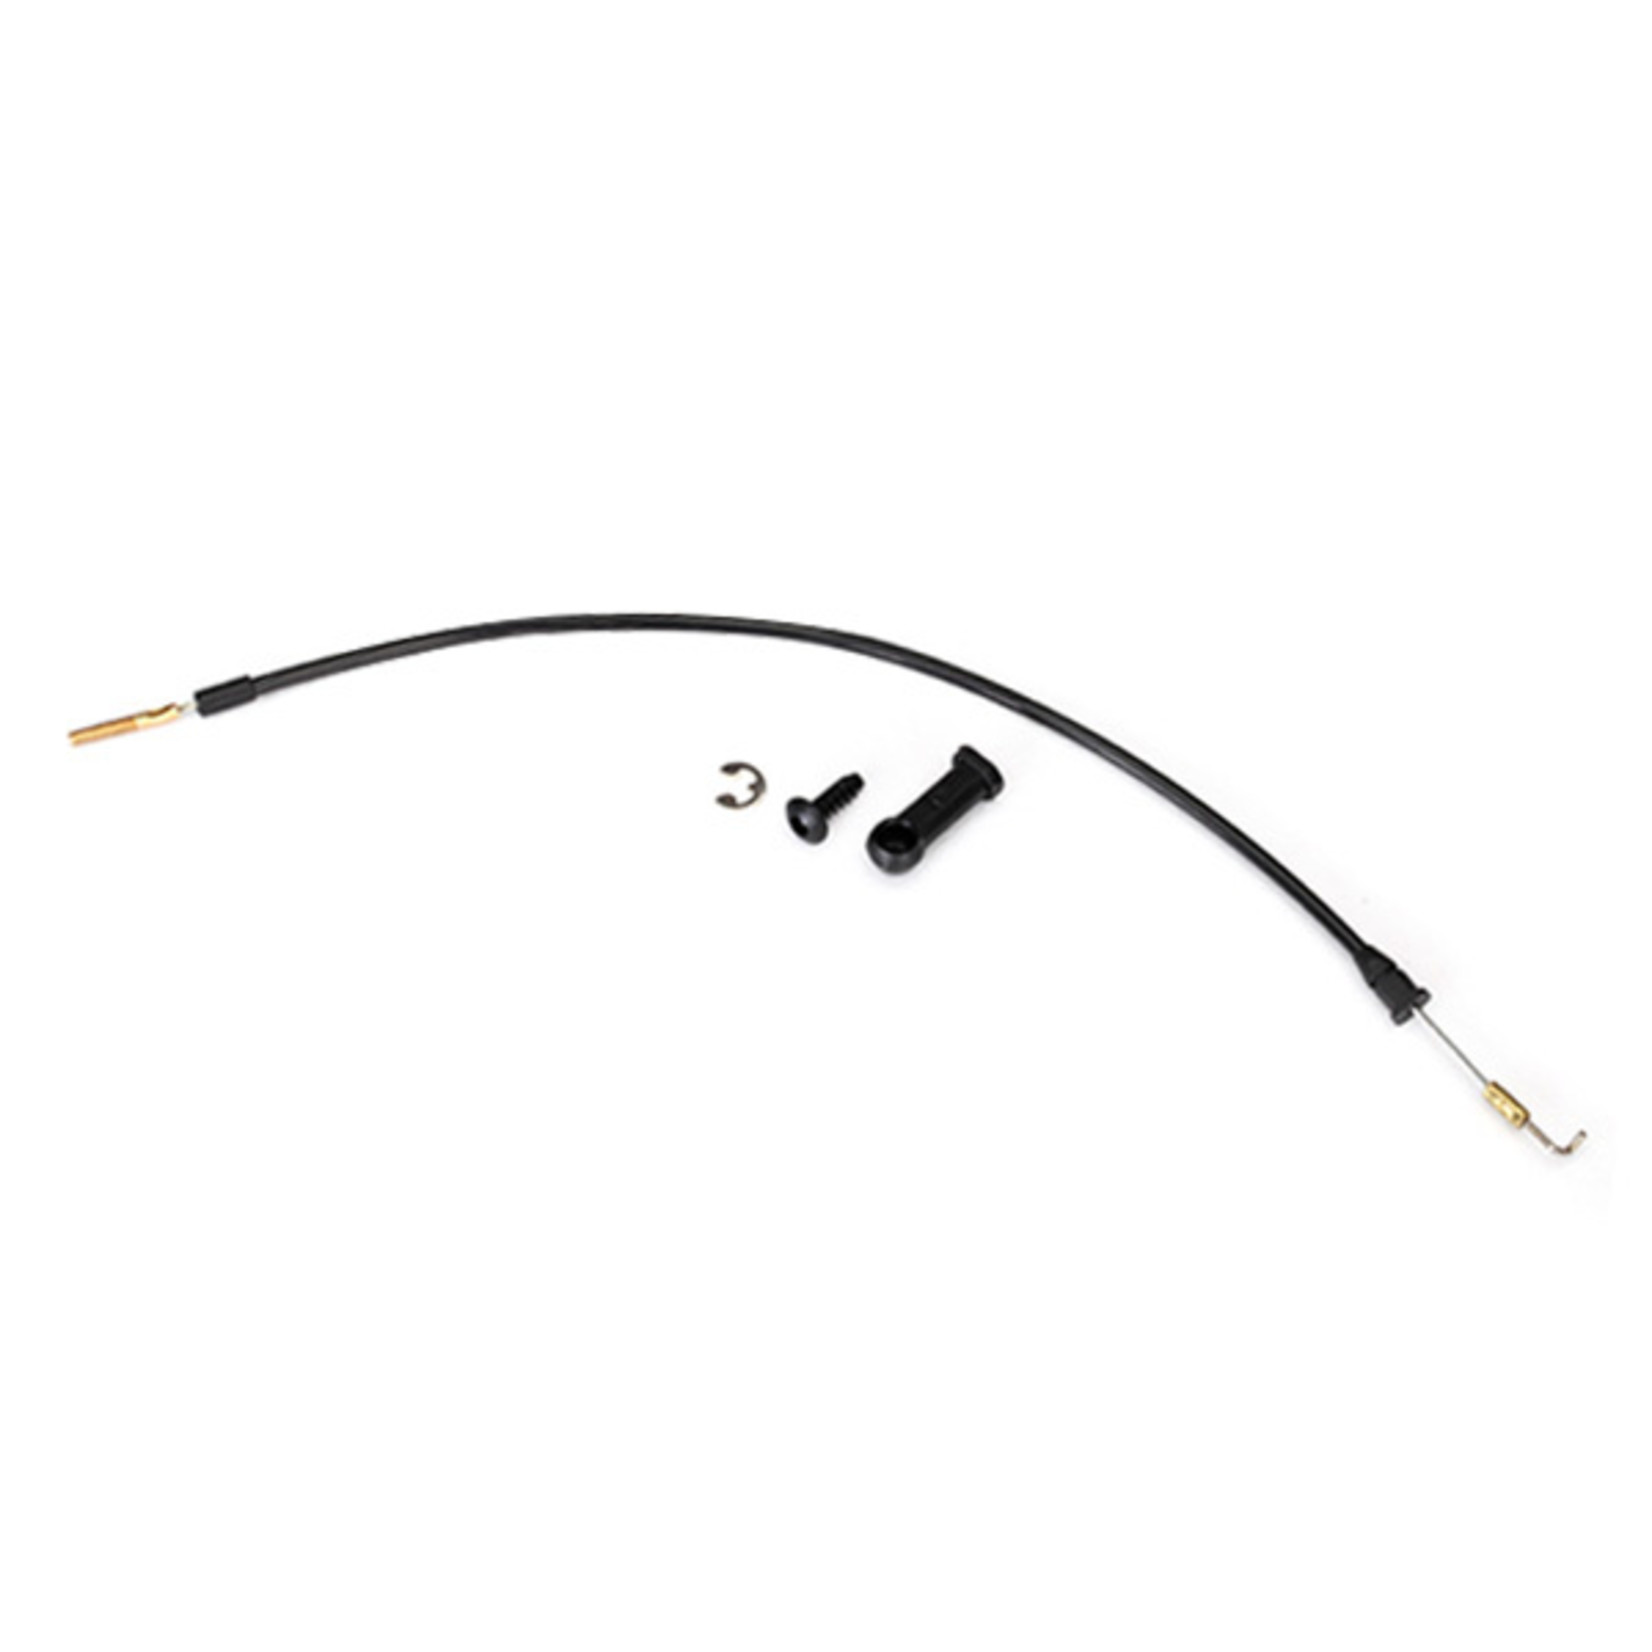 Traxxas 8283 - Cable, T-lock (front)